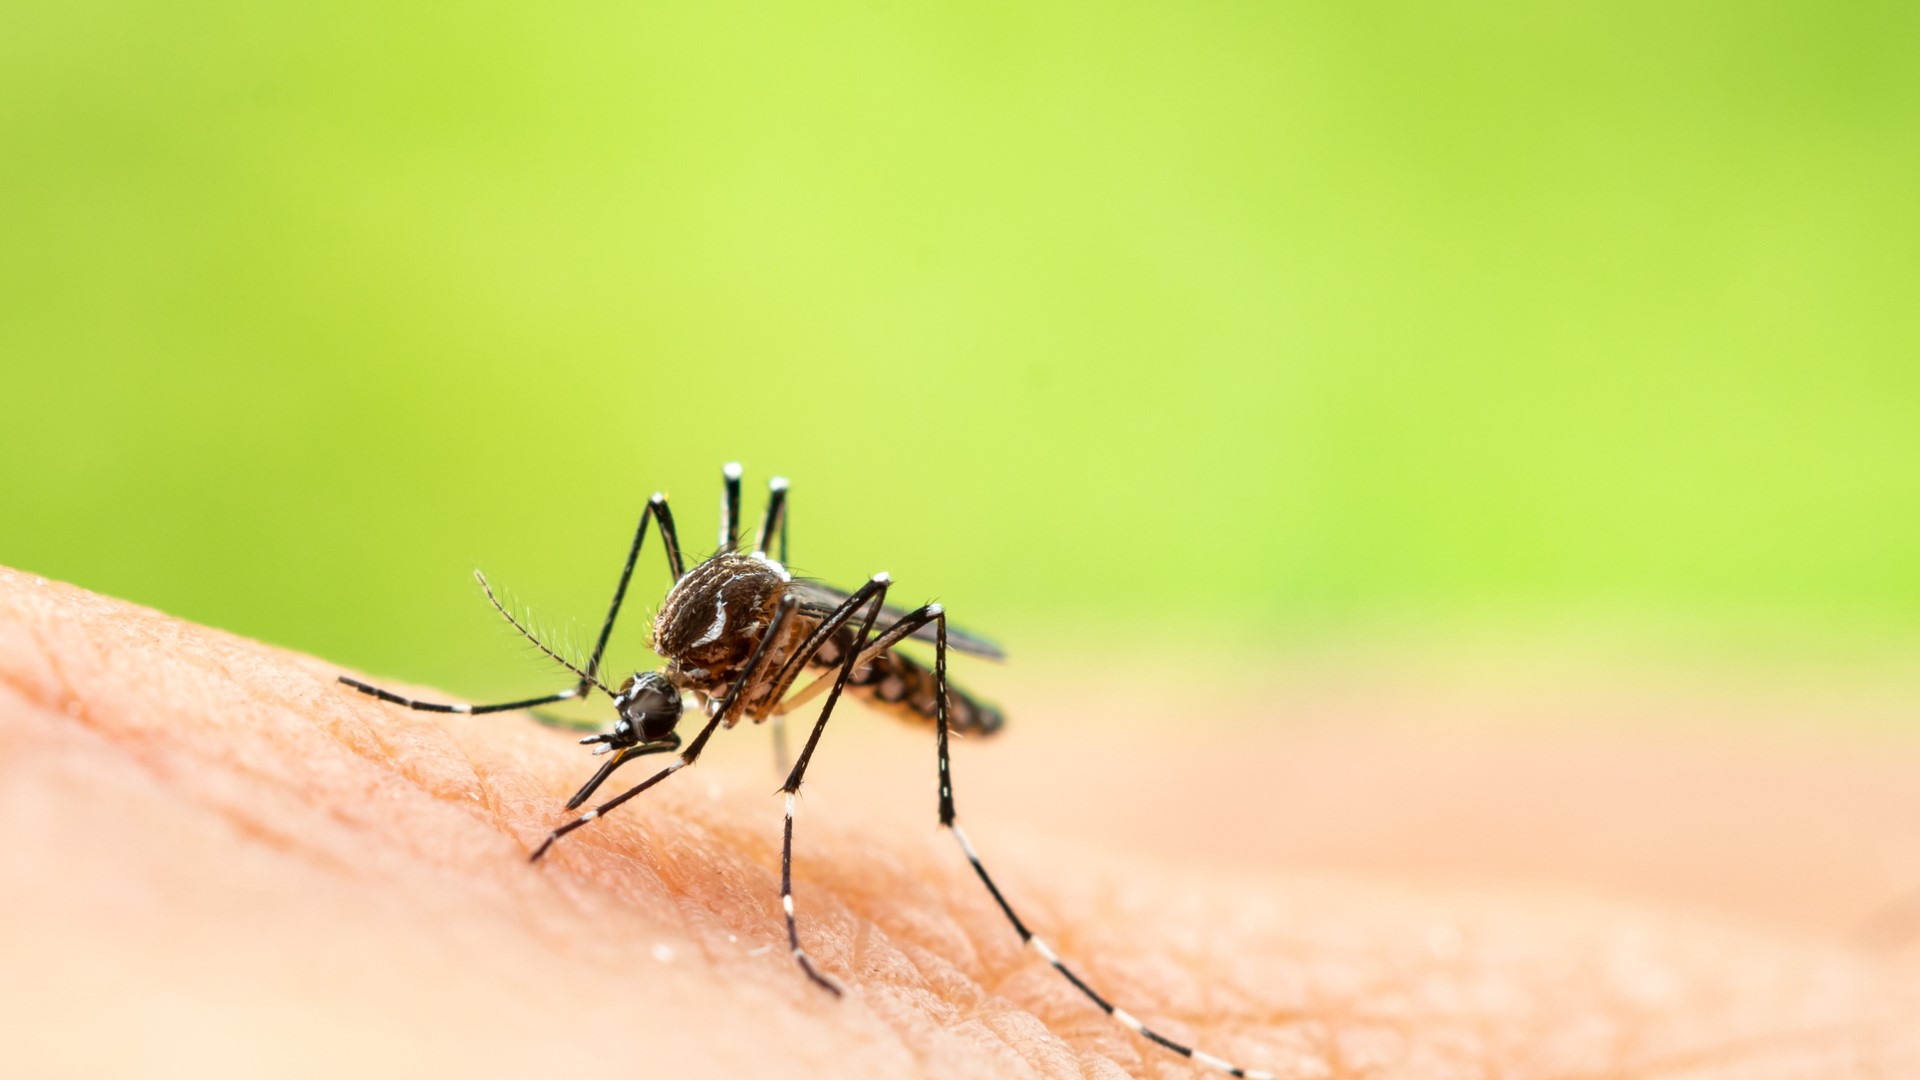 Florida health officials put out a warning about a rise in a mosquito-borne virus called Eastern equine encephalitis (EEE).

The Florida Department of Health in Orange County let residents know several sentinel chickens in the area tested positive for EEE. That means the risk for the virus to spread to people goes up. https://on.wtsp.com/2GDTr2q